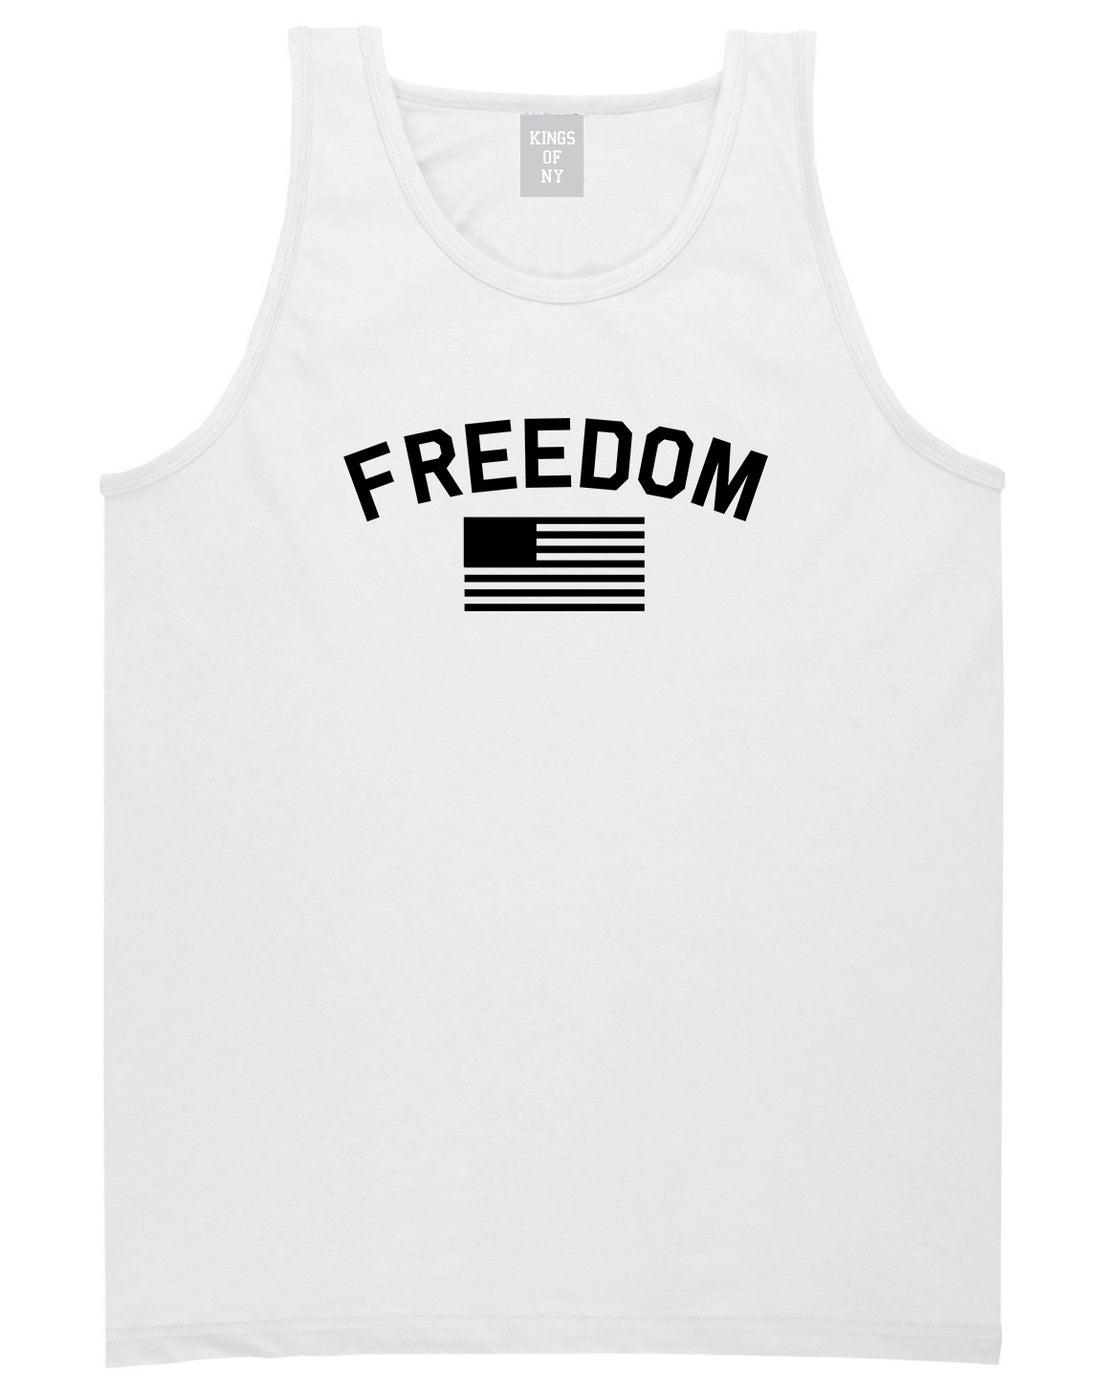 Freedom Flag Mens White Tank Top Shirt by KINGS OF NY